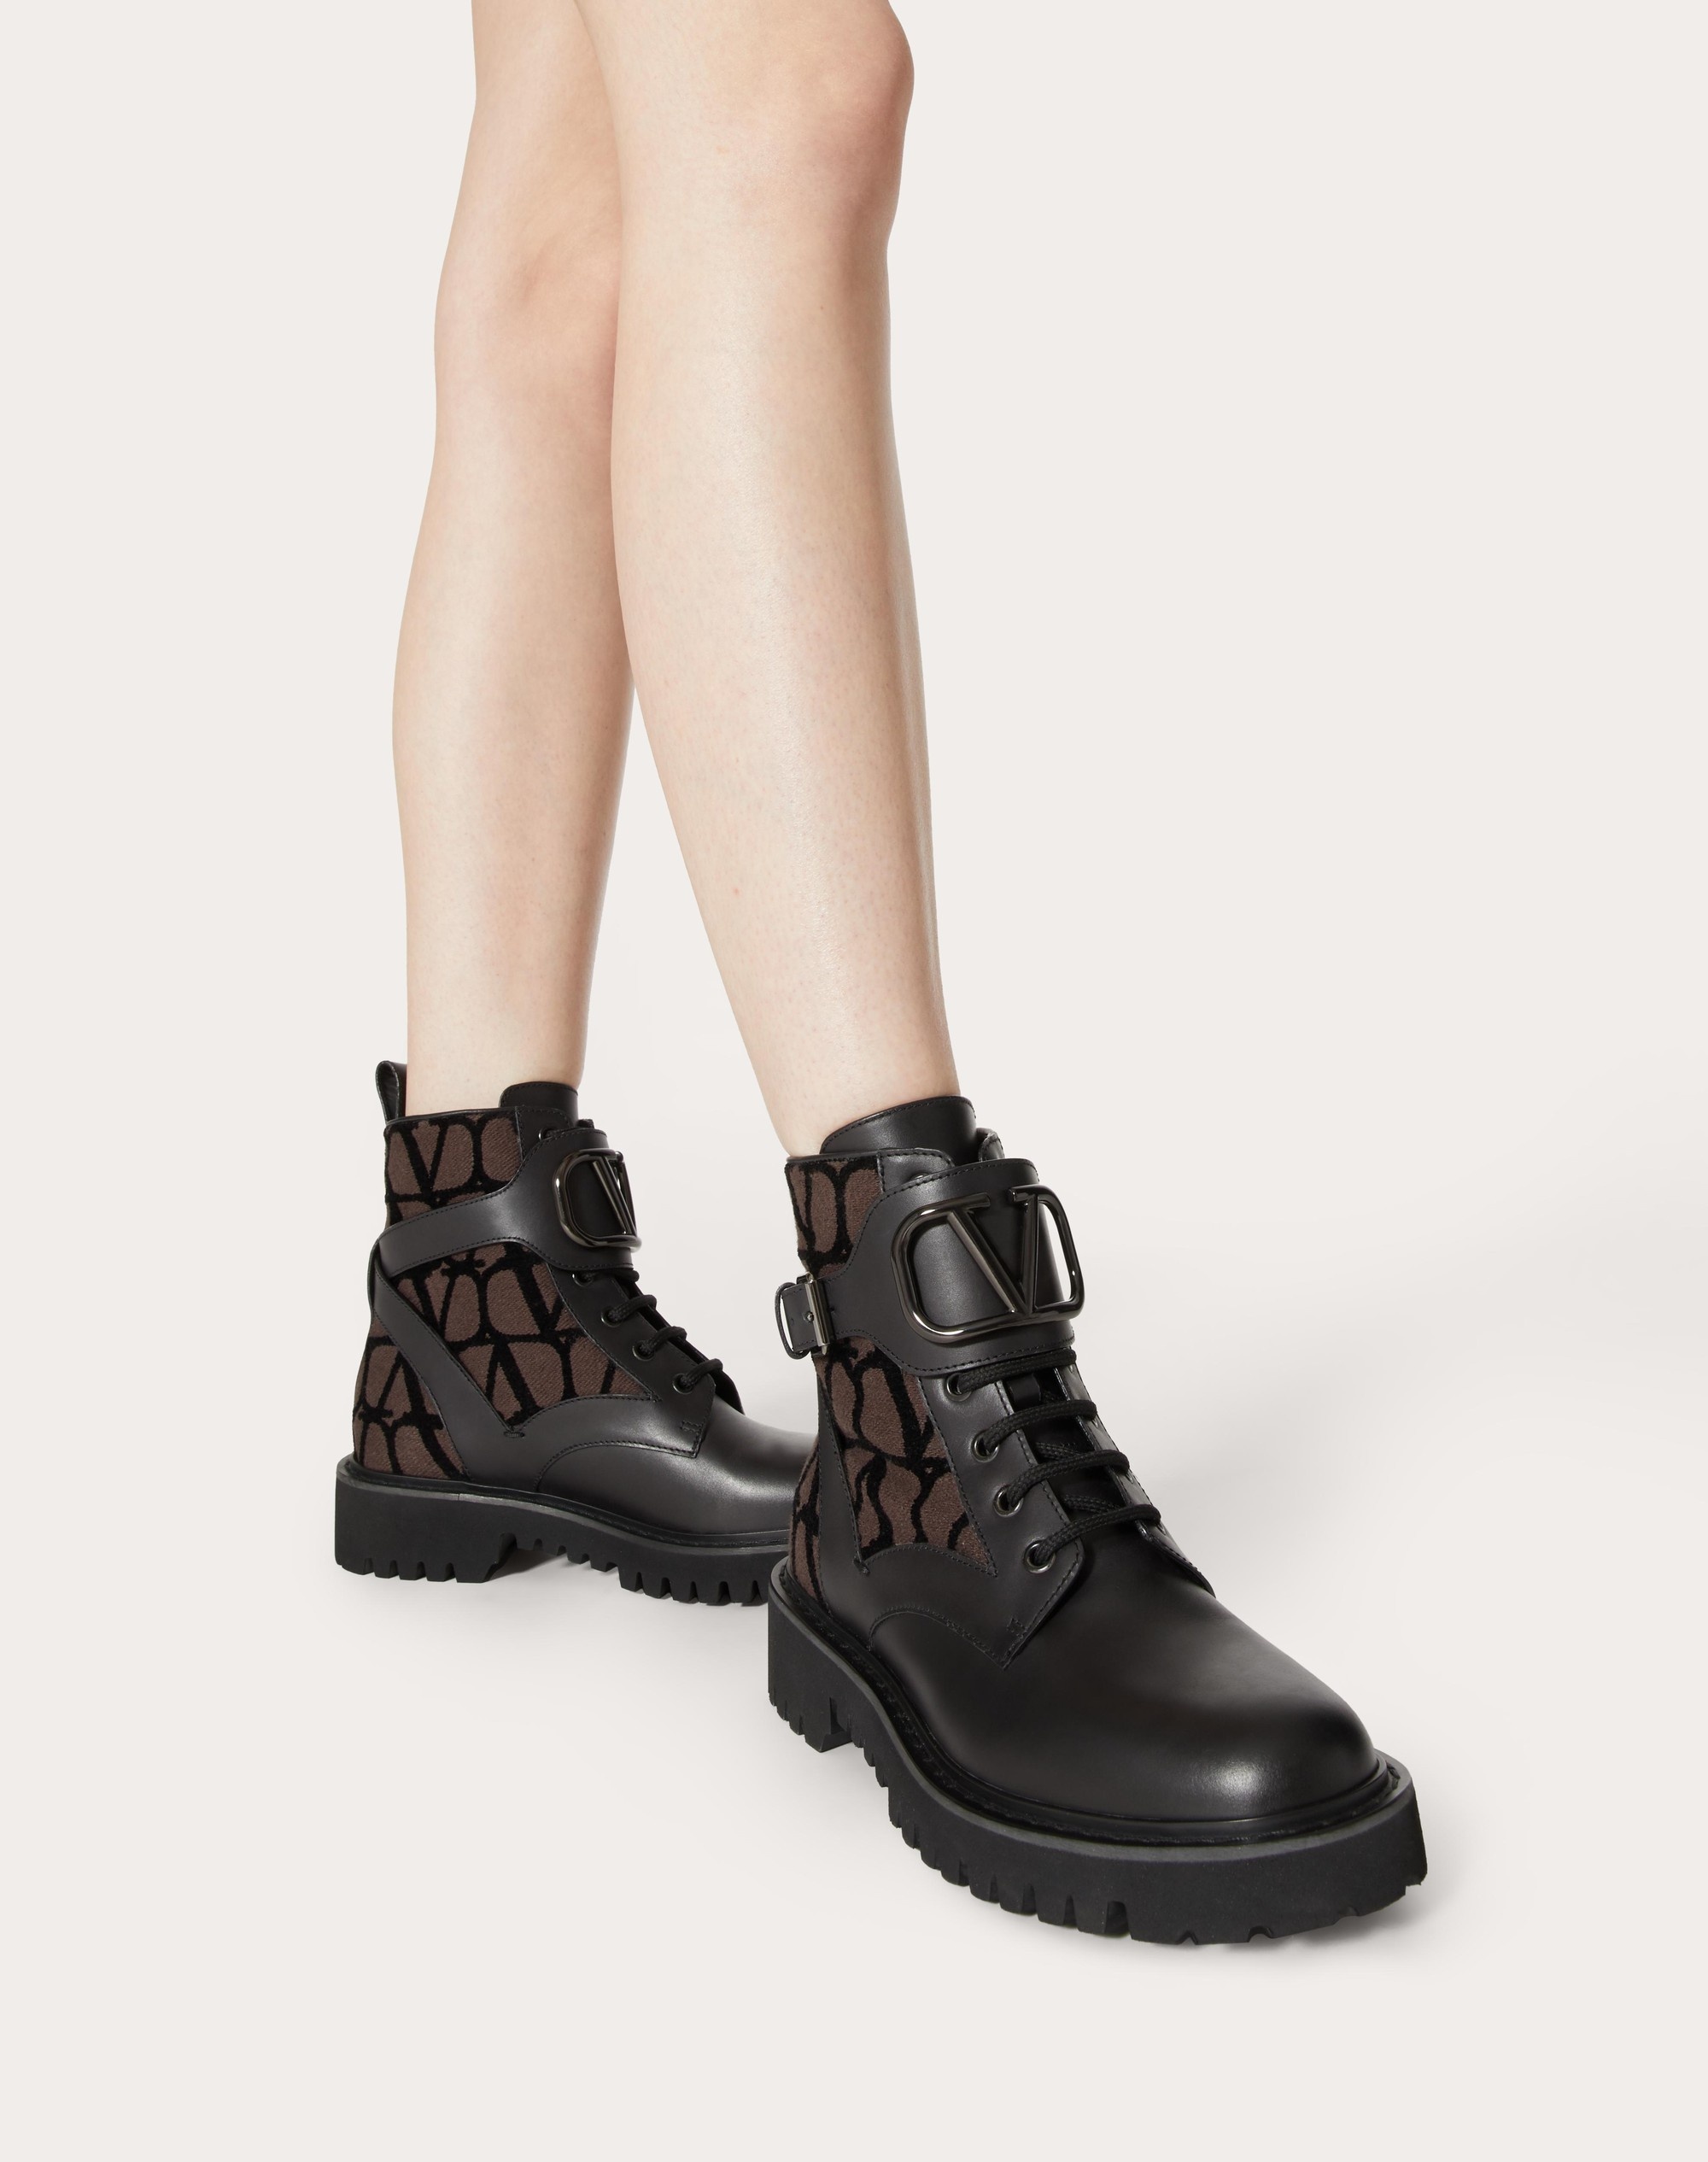 VLOGO SIGNATURE COMBAT BOOT IN CALFSKIN AND TOILE ICONOGRAPHE 35MM - 6